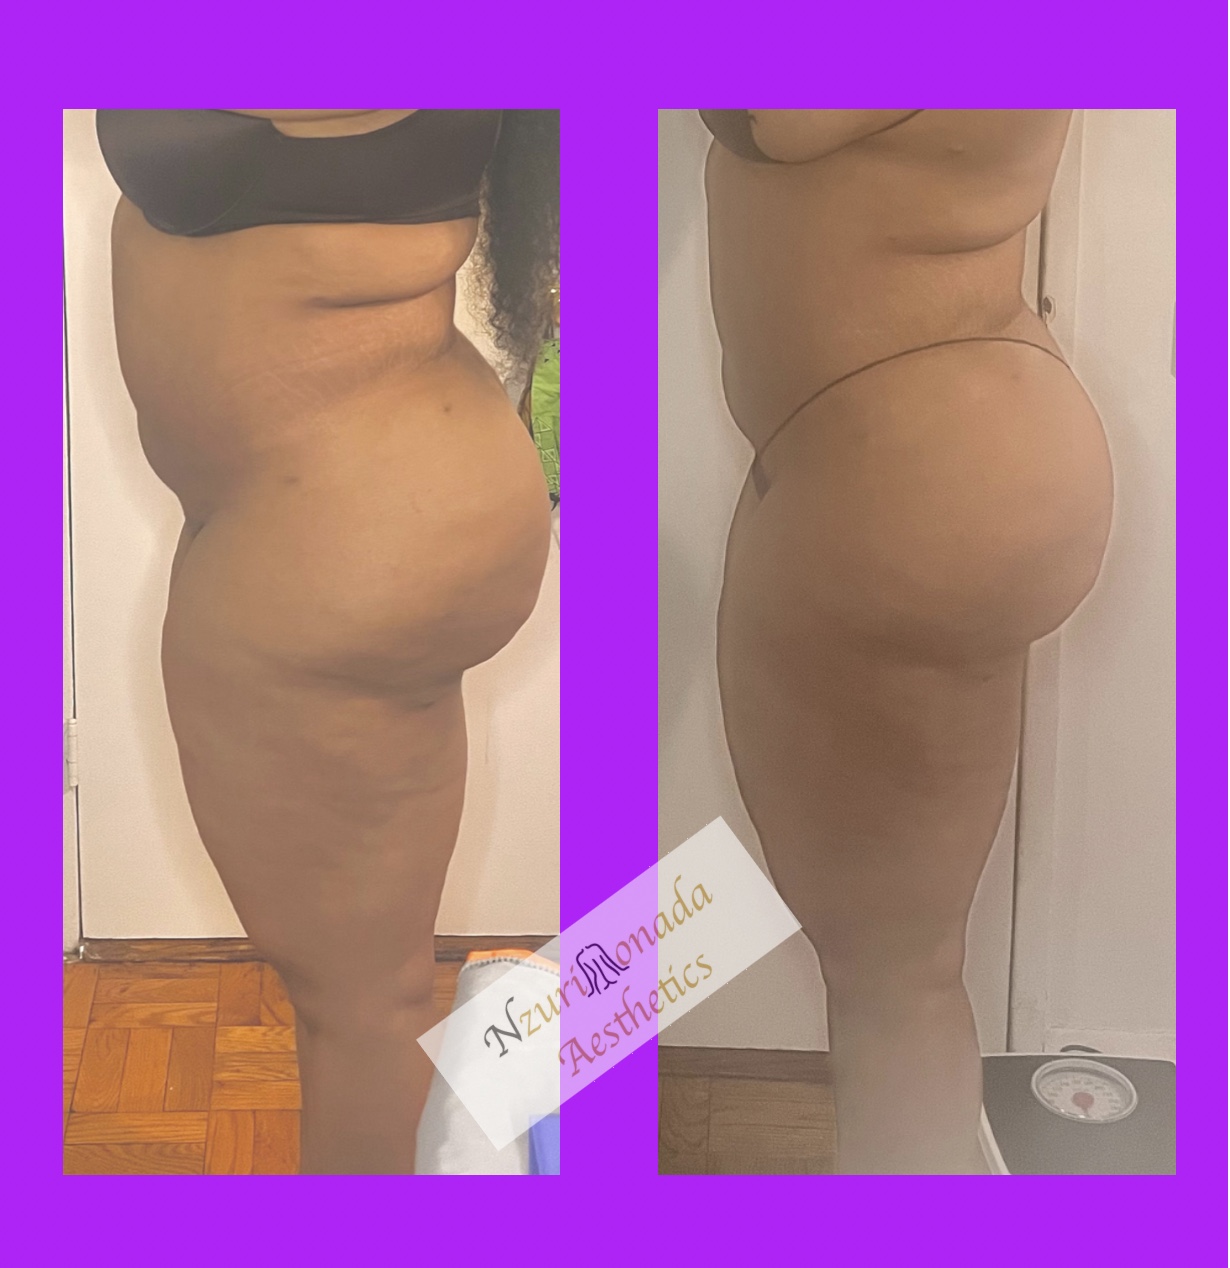 Before and after stomach lipo and cellulite reduction